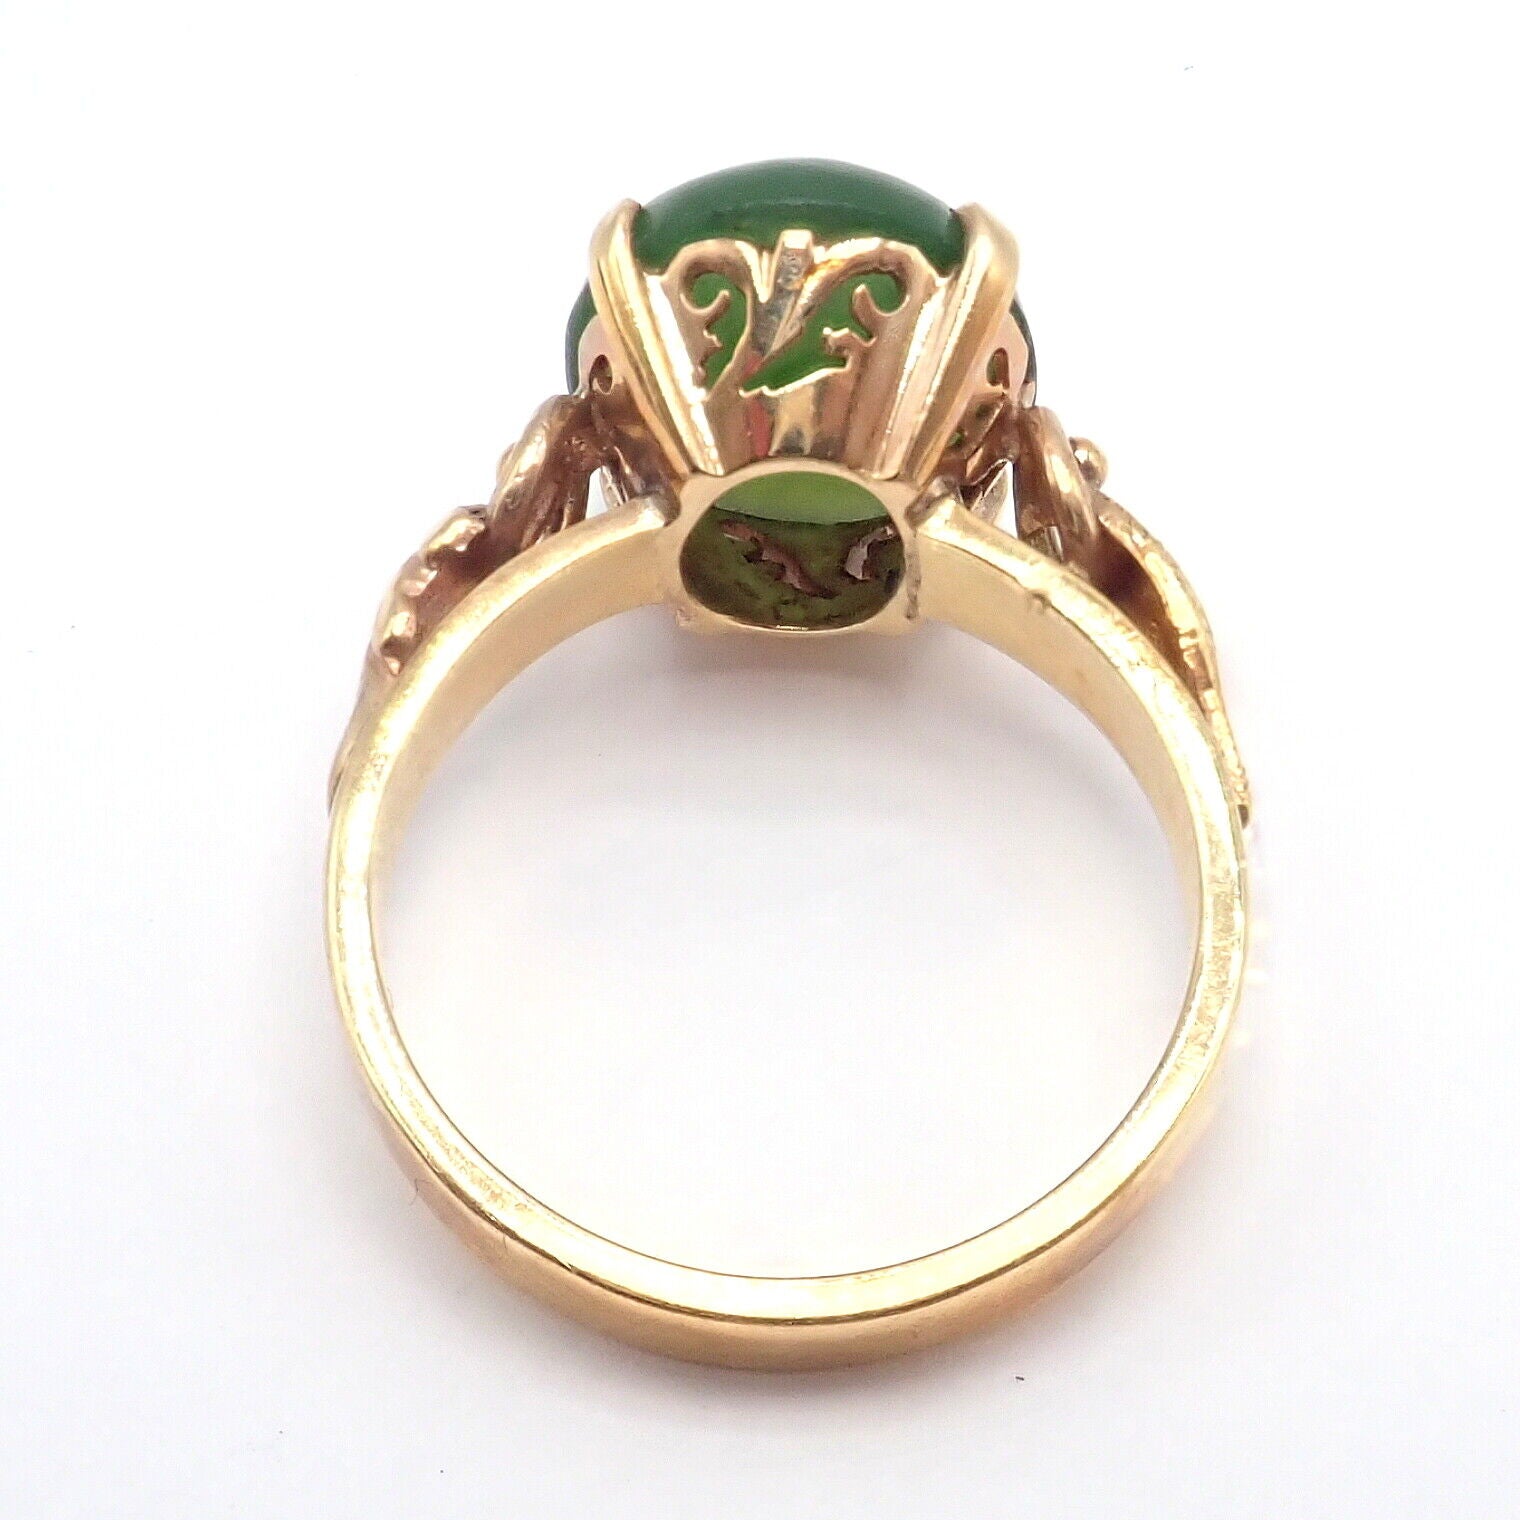 MG Jewelry & Watches:Vintage & Antique Jewelry:Rings Vintage Estate 14k Yellow Gold Jade MG Ring sz 5